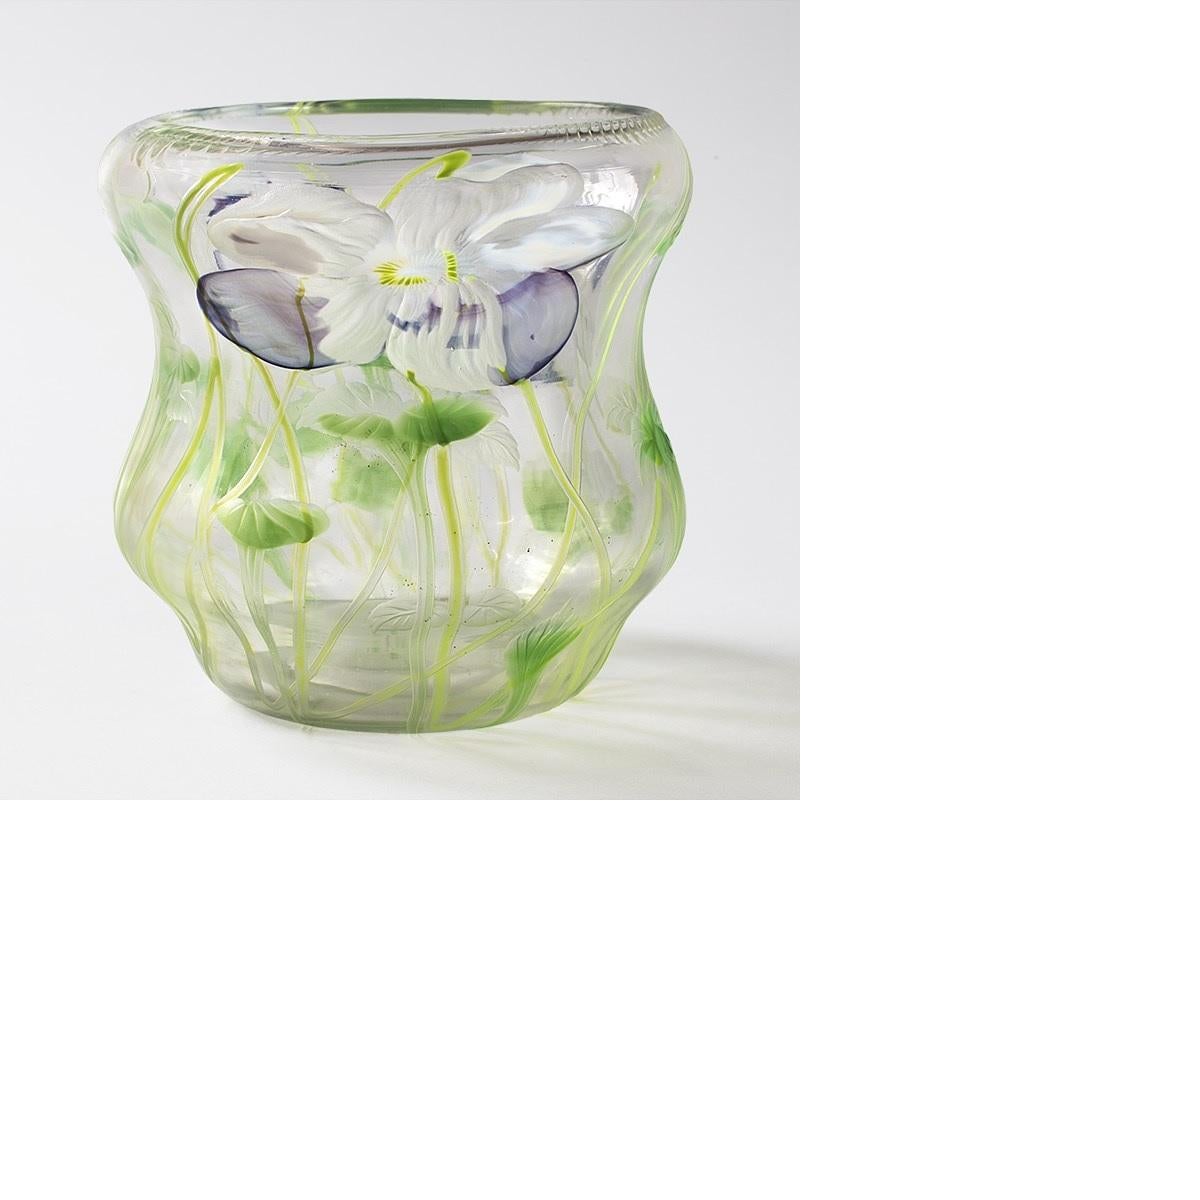 An intaglio carved translucent vase by Tiffany Studios New York. The vase is decorated with purple and white flowers and green leafy stems on a clear ground. Leaves, some green and others clear, are carved into the vase.

A similar vase is